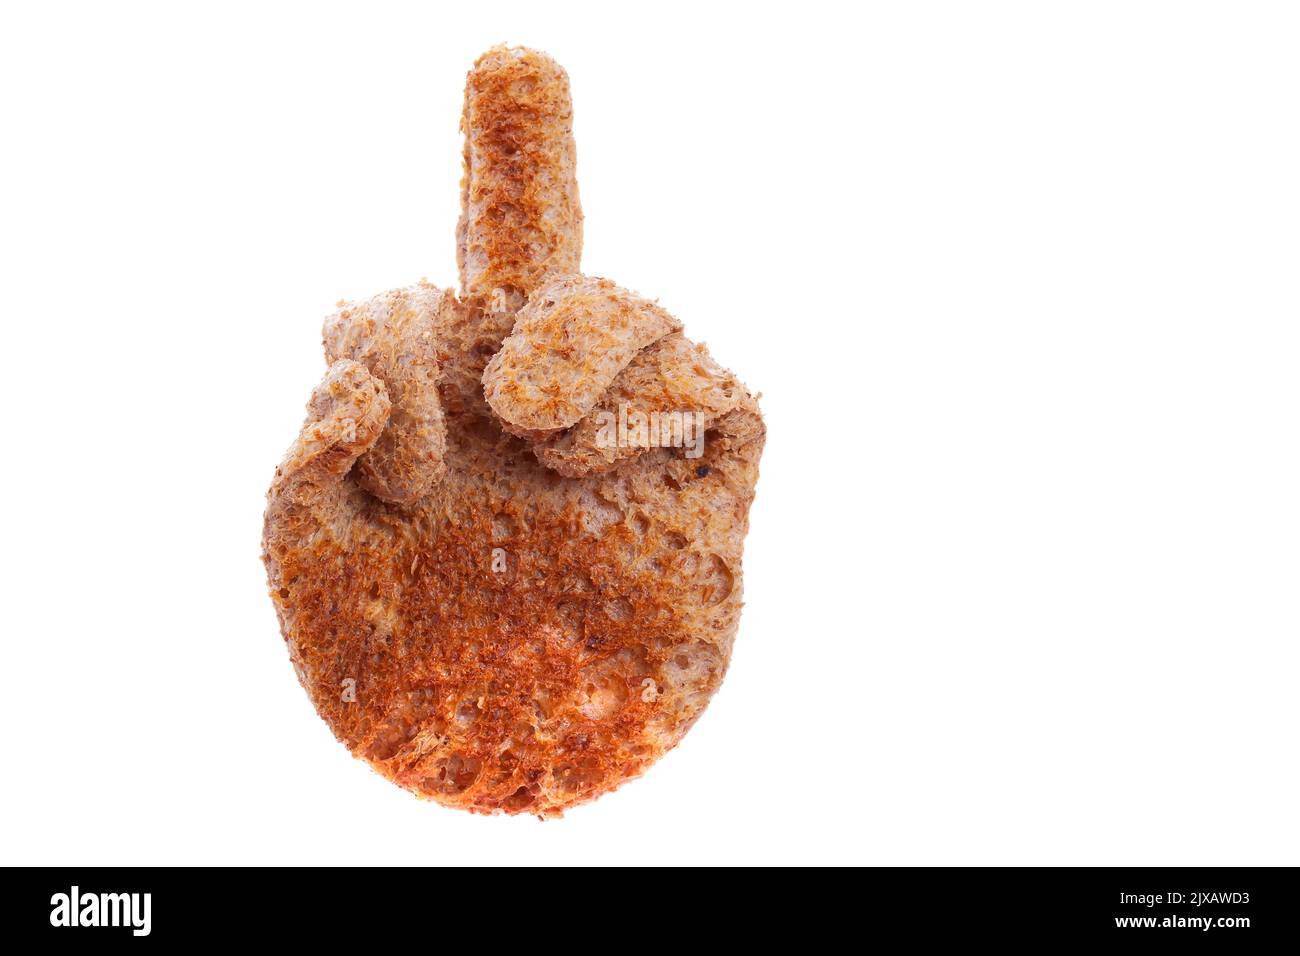 Middle finger sign made from toasted brown bread slice isolated on white background. Fun food concept Stock Photo